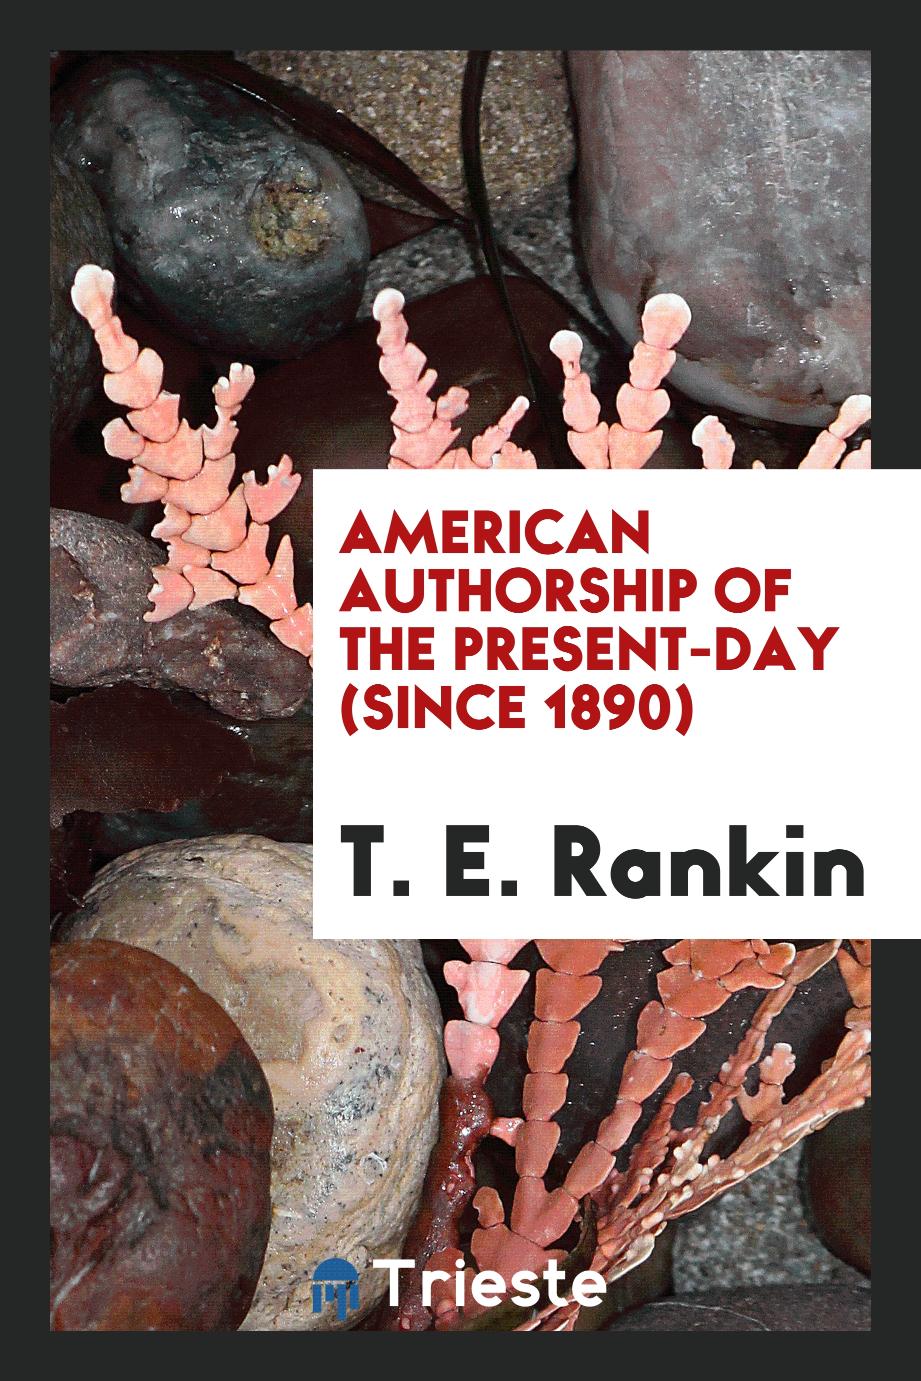 T. E. Rankin - American Authorship of the Present-Day (Since 1890)